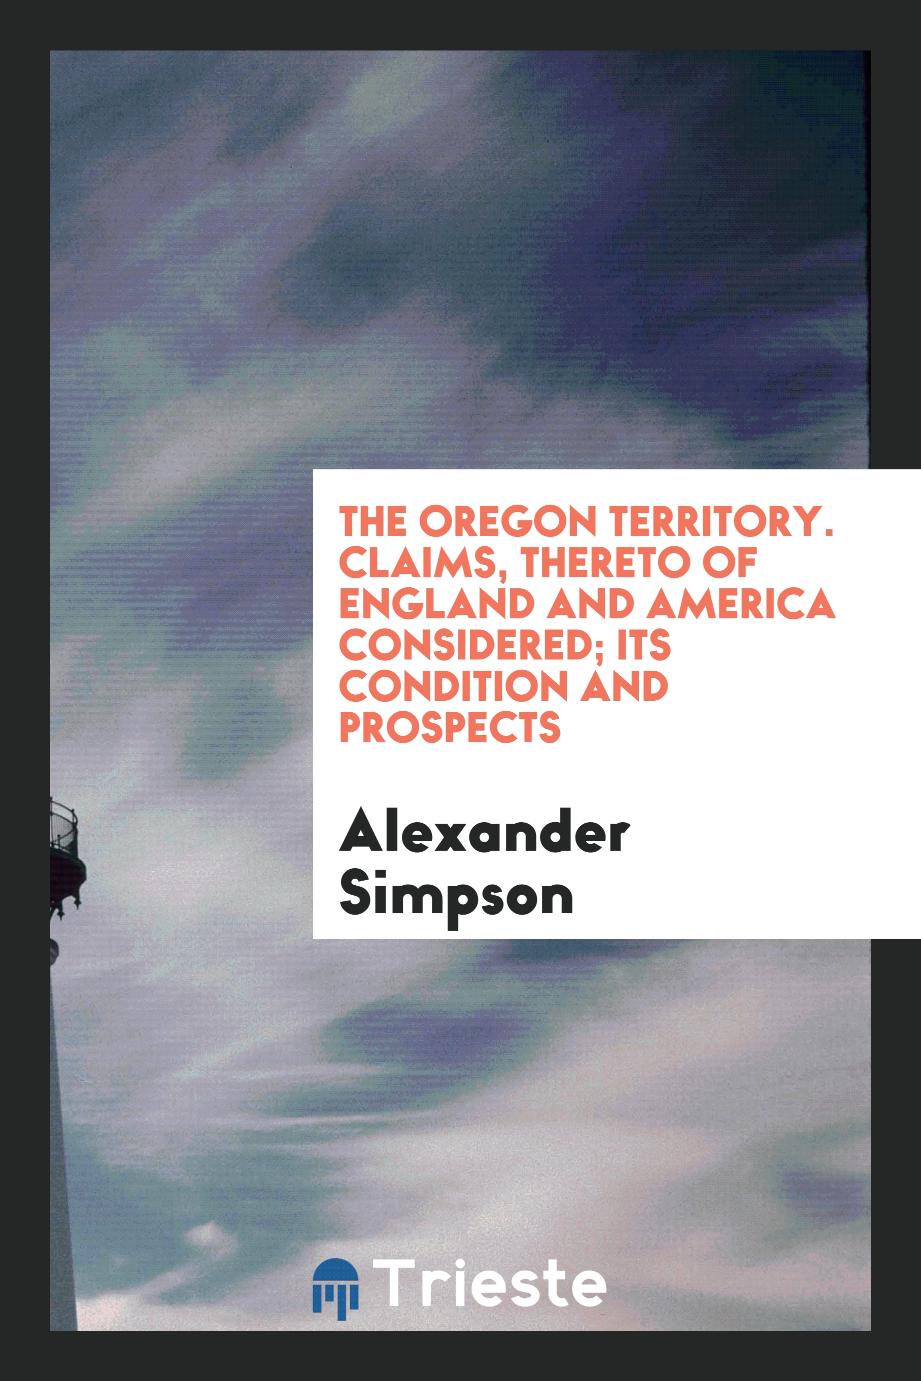 THE OREGON TERRITORY. Claims, thereto of England and America considered; its condition and prospects